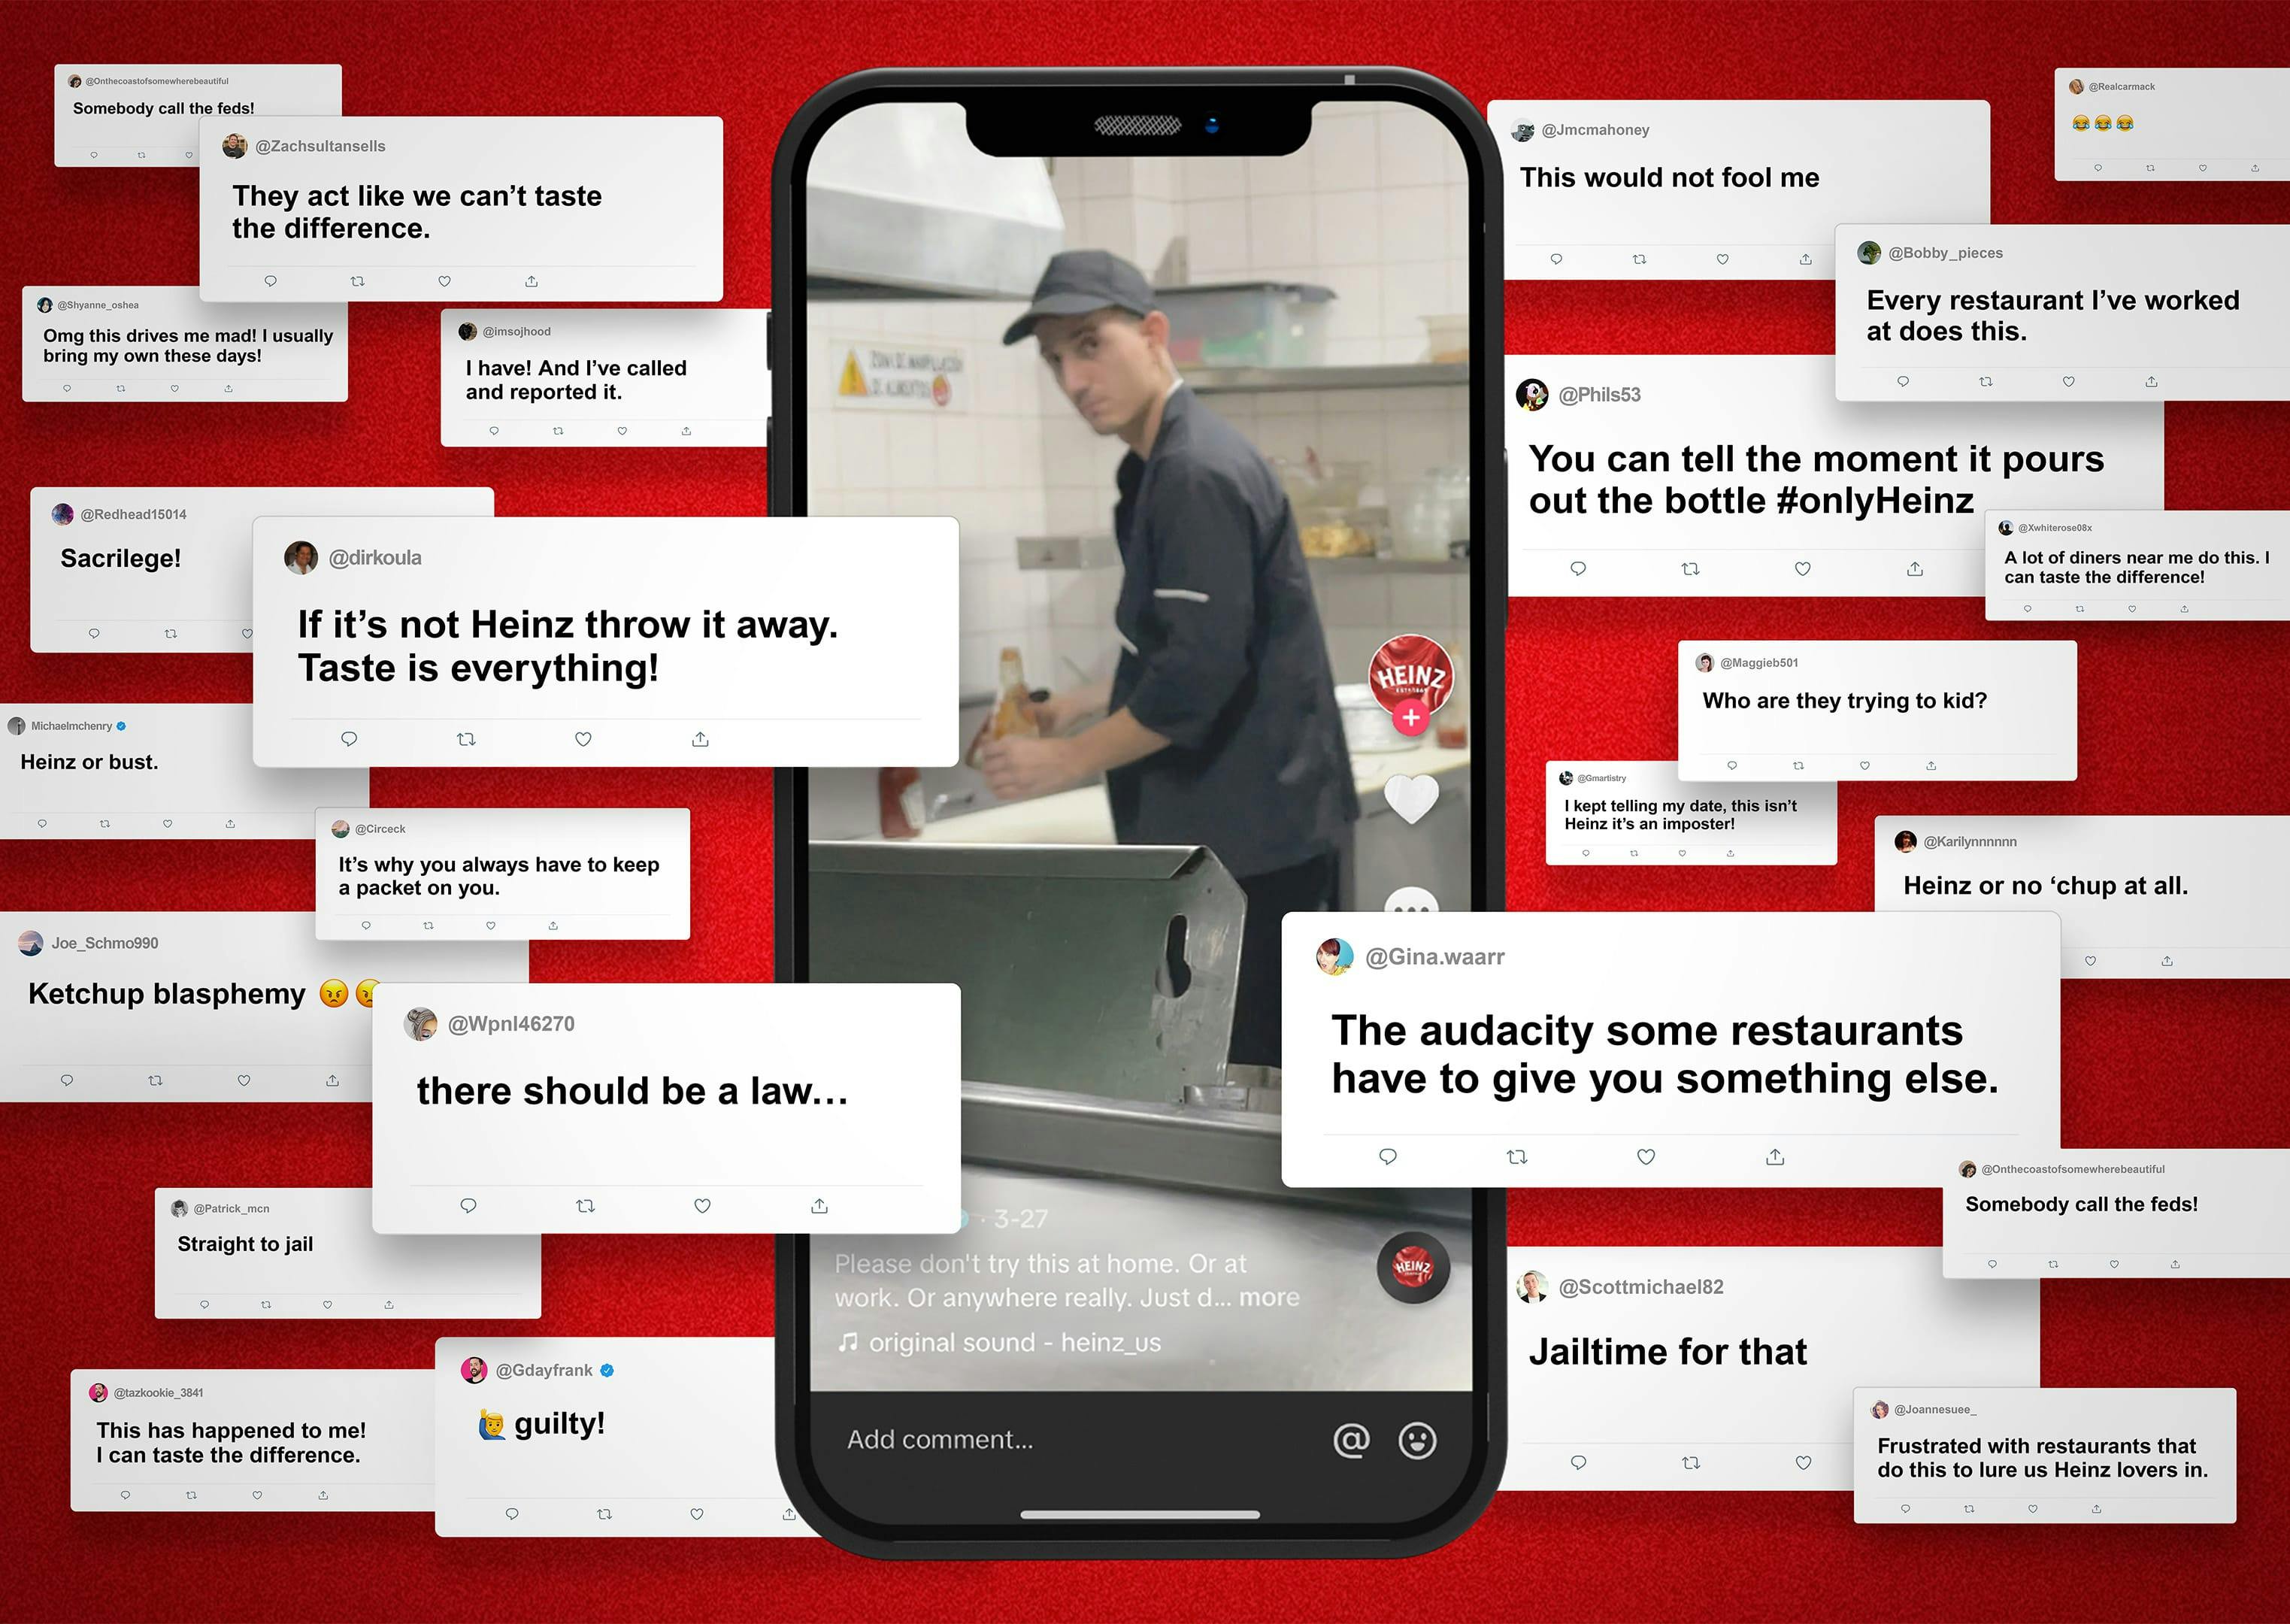 A creative social media-themed image with multiple overlapping comments and posts relating to ketchup preferences, with a central picture of a phone with an image showing a chef in a kitchen handling a bottle of ketchup.